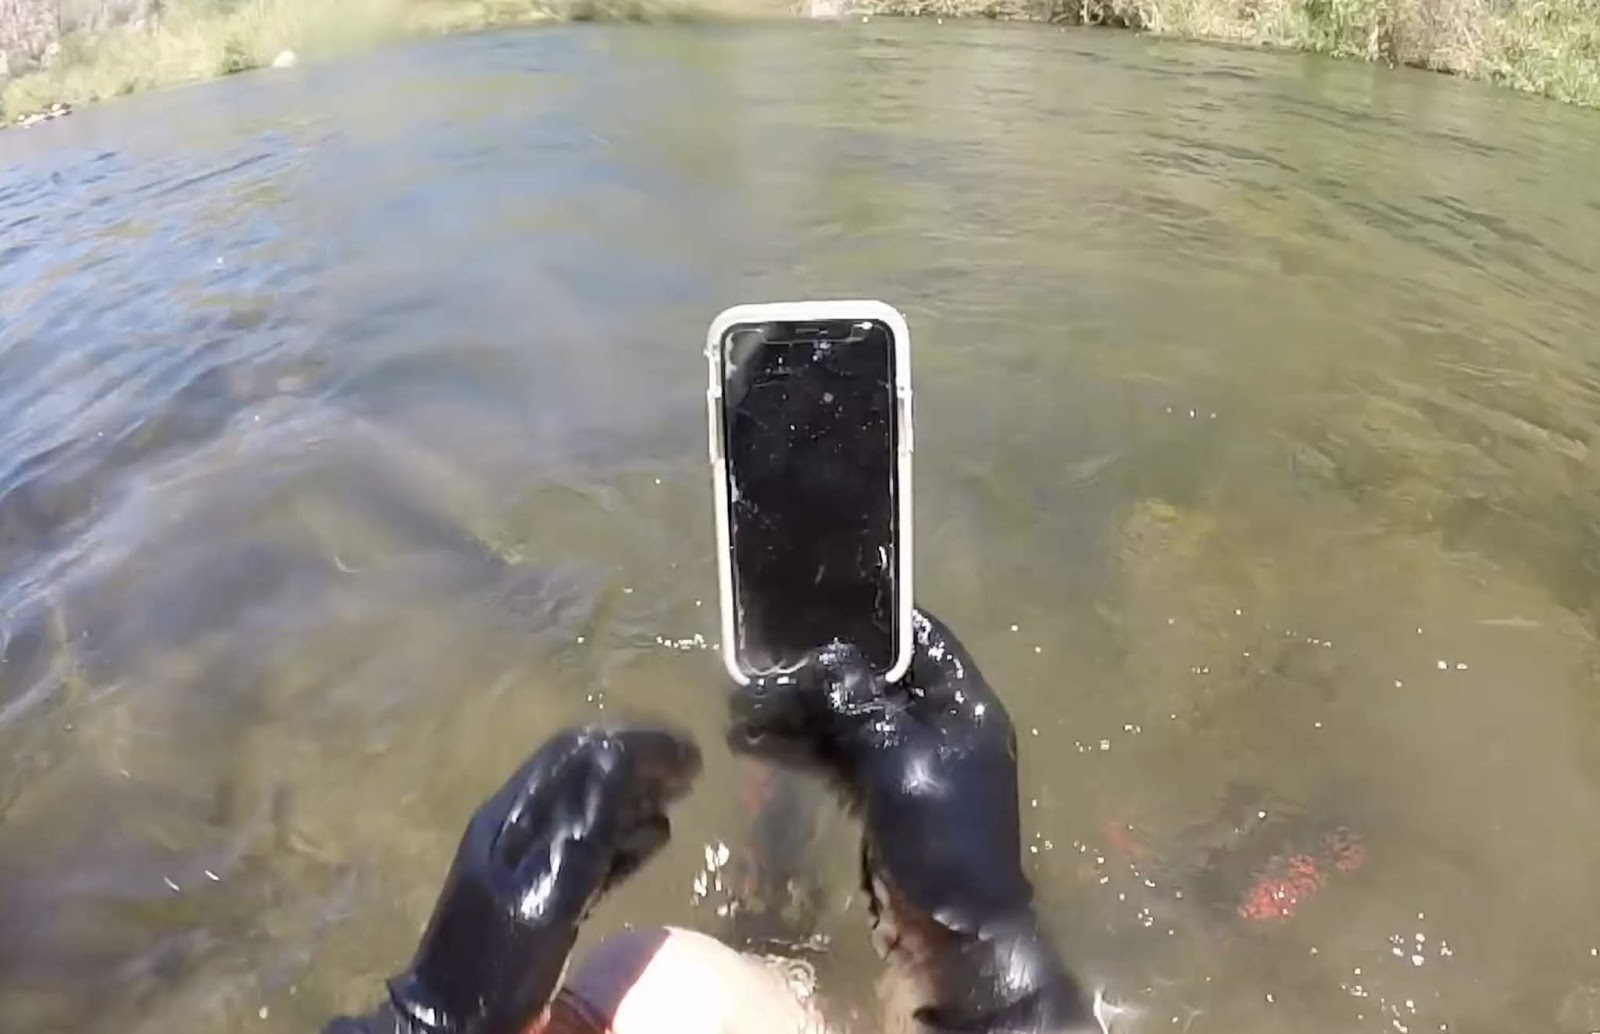 An iPhone X Survives 2 weeks Immersed in a River, they Found it and it works Perfectly